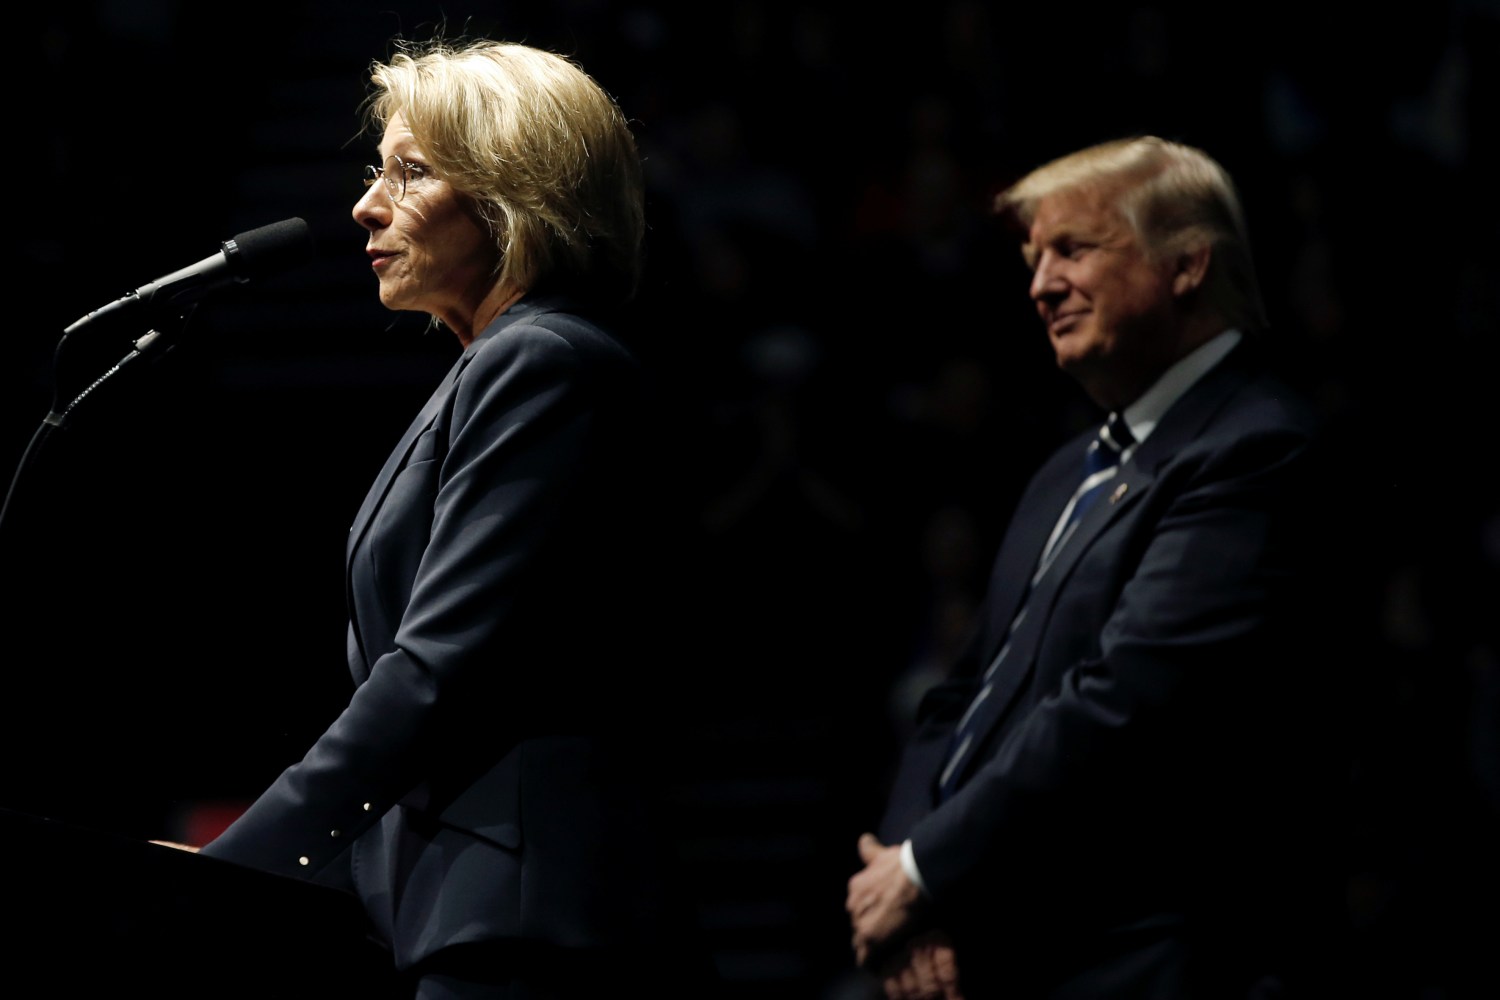 U.S. President-elect Donald Trump looks on as his choice for U.S. Education Secretary Betsy DeVos speaks at a "Thank You USA" tour rally in Grand Rapids, Michigan, U.S. December 9, 2016. REUTERS/Mike Segar - RTX2UD61